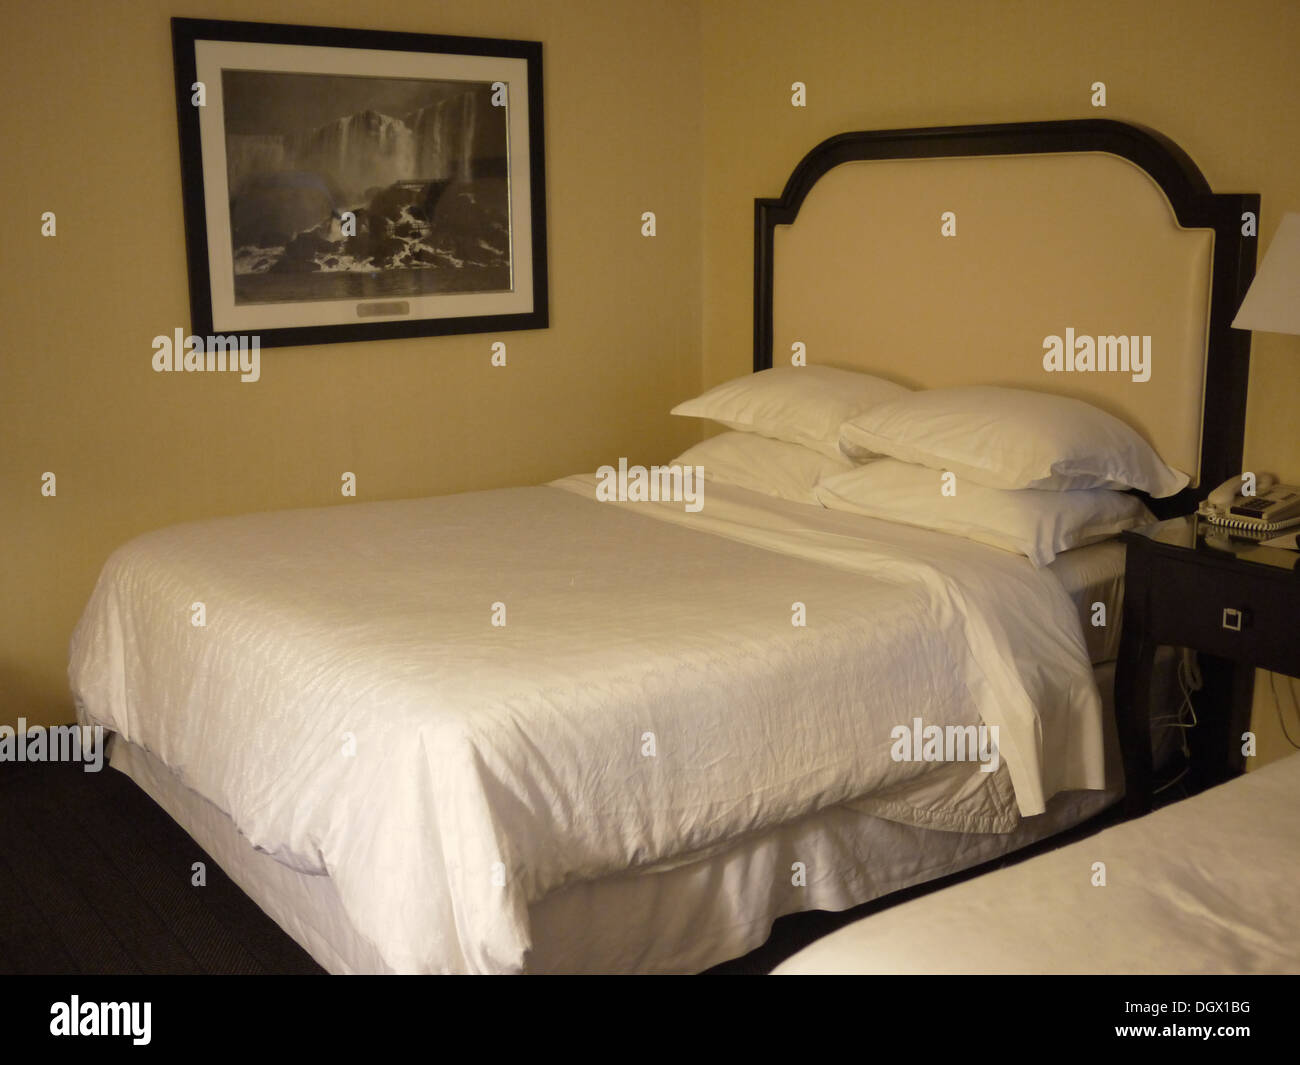 queen size sheraton hotel bed Stock Photo